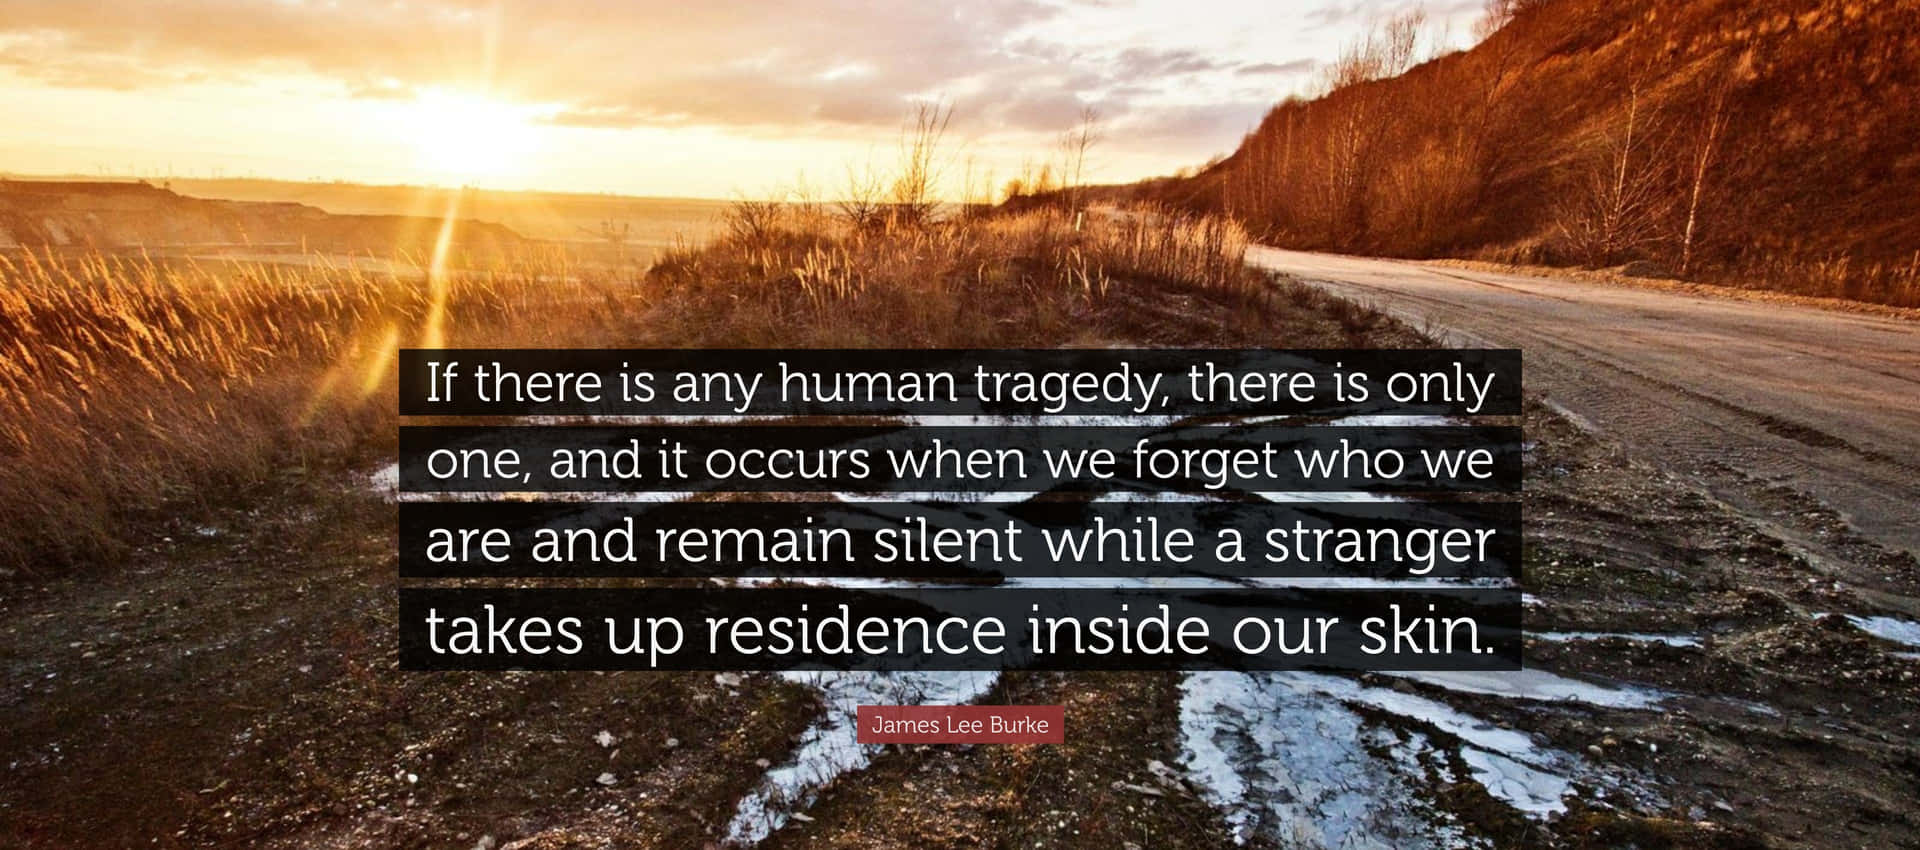 Human Tragedy Quote Sunset Road Wallpaper